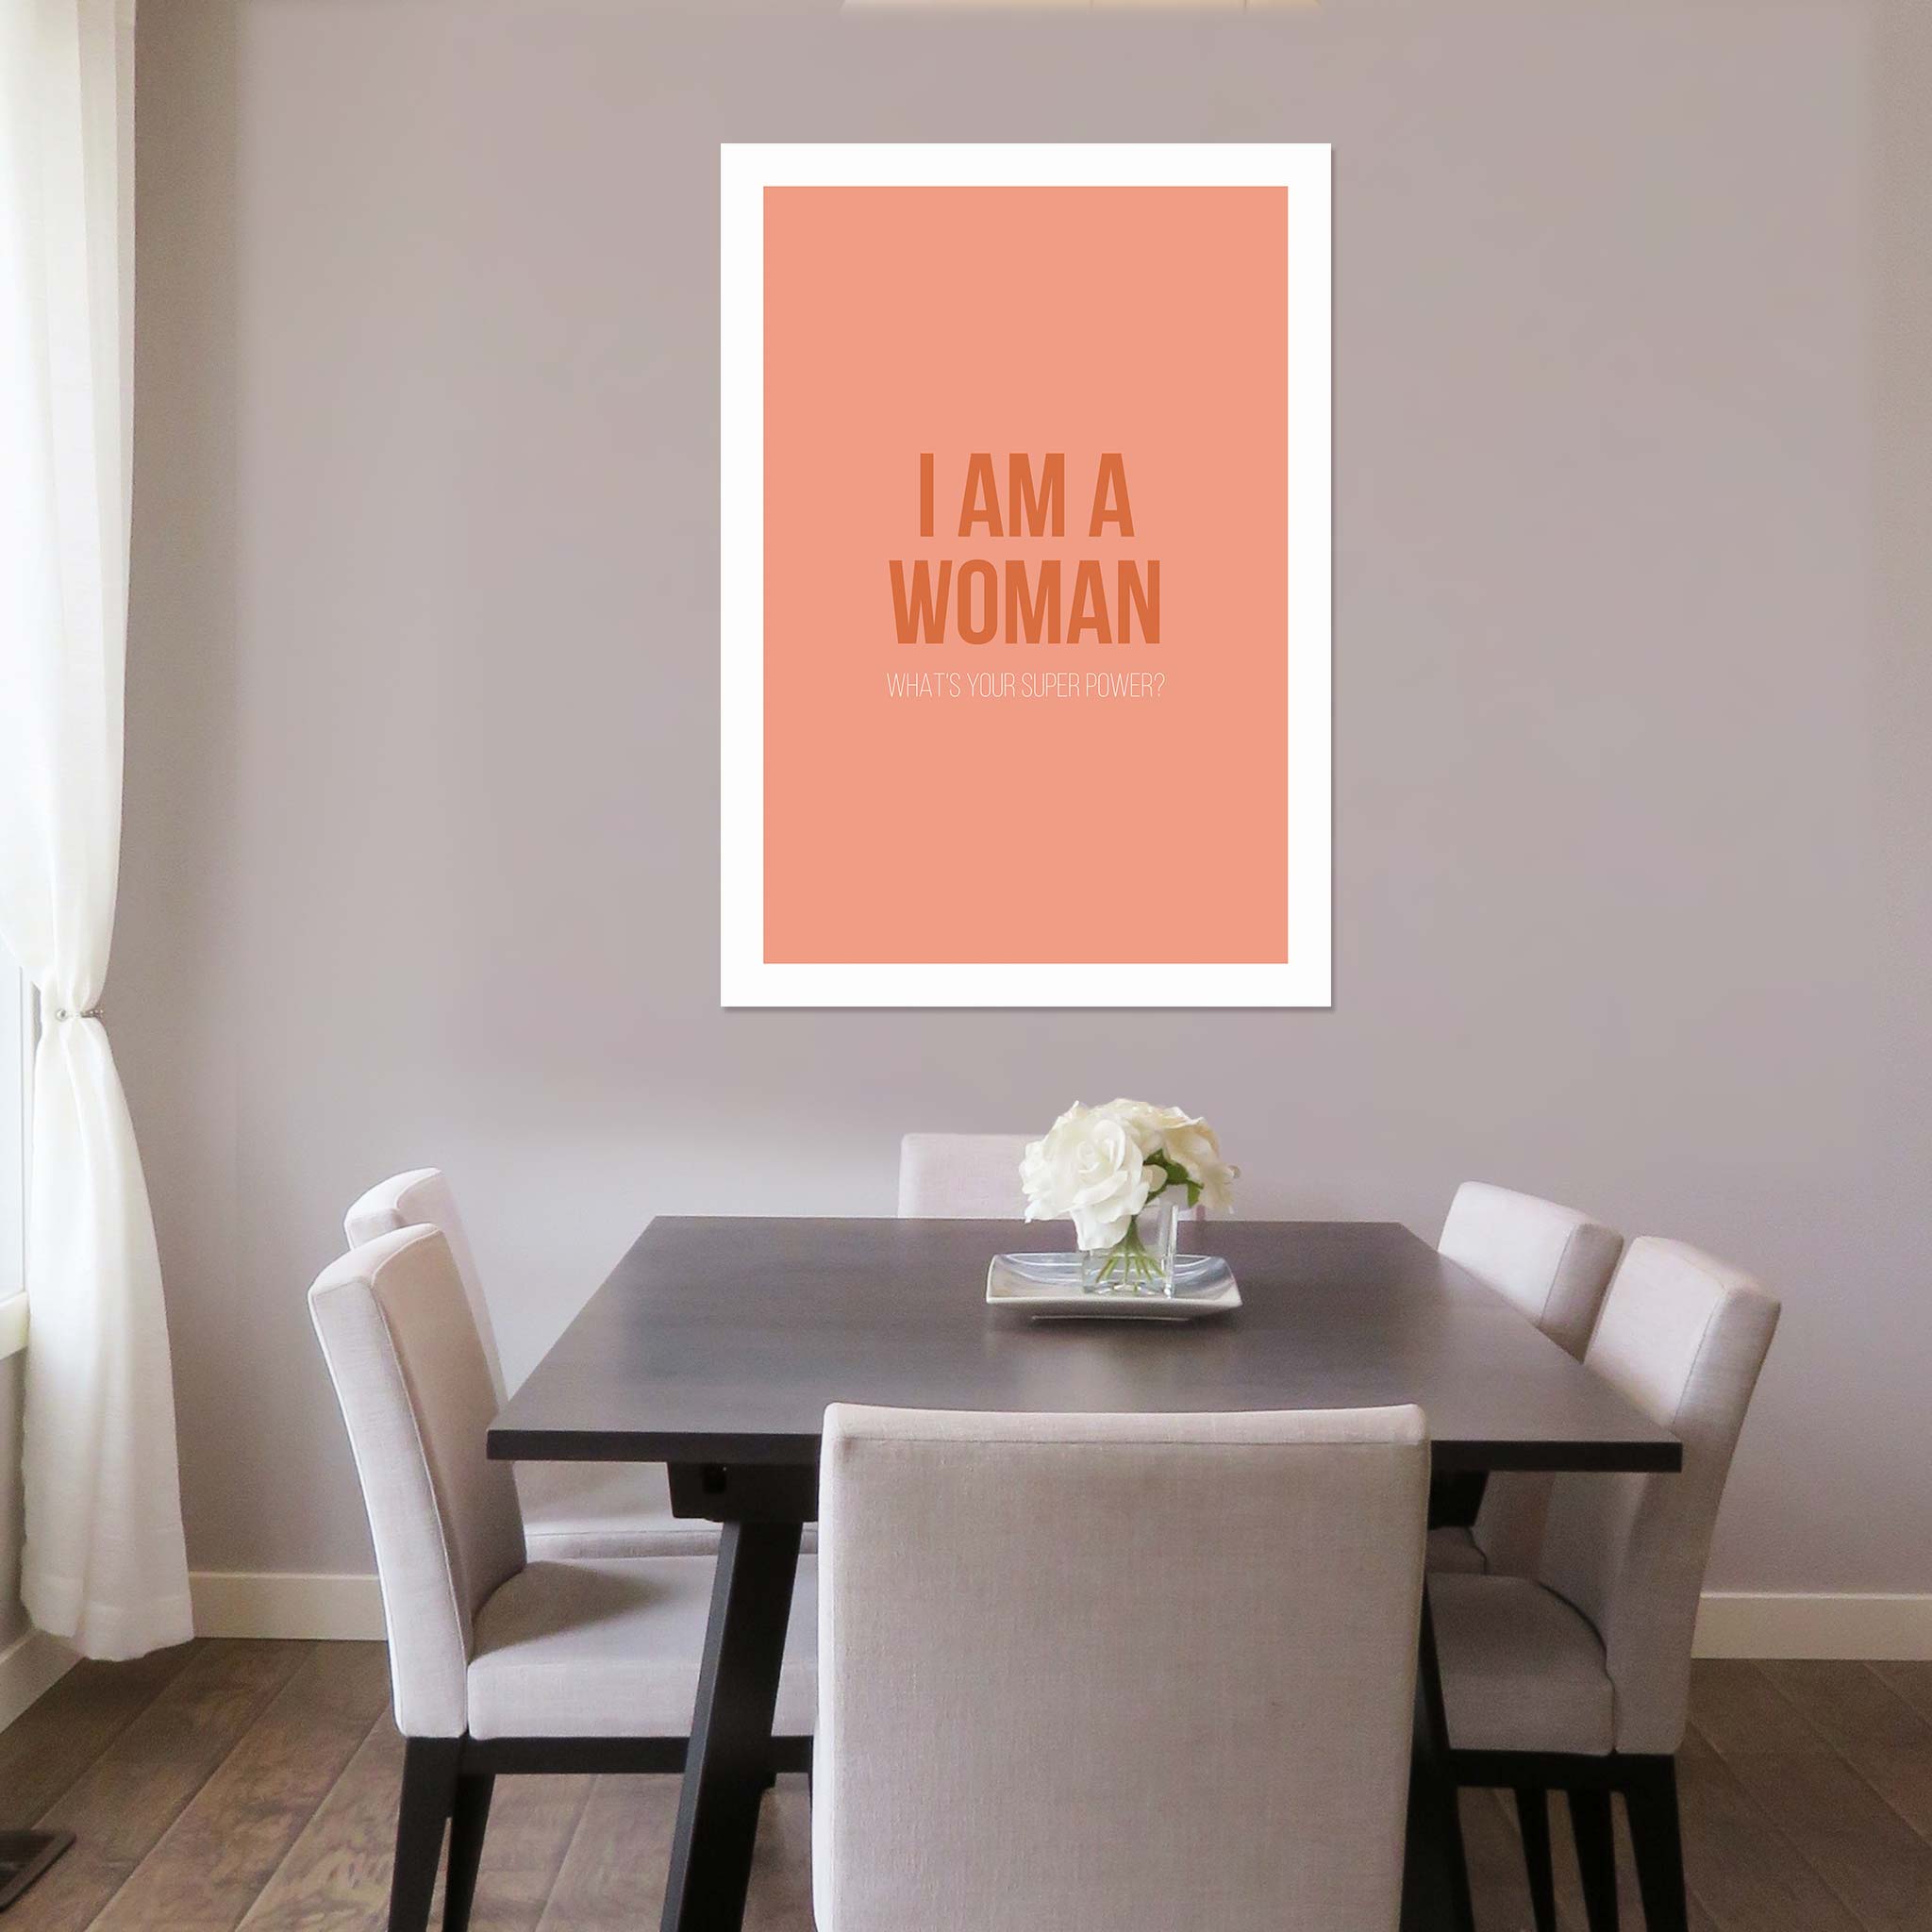 I am a women, what’s your super power?